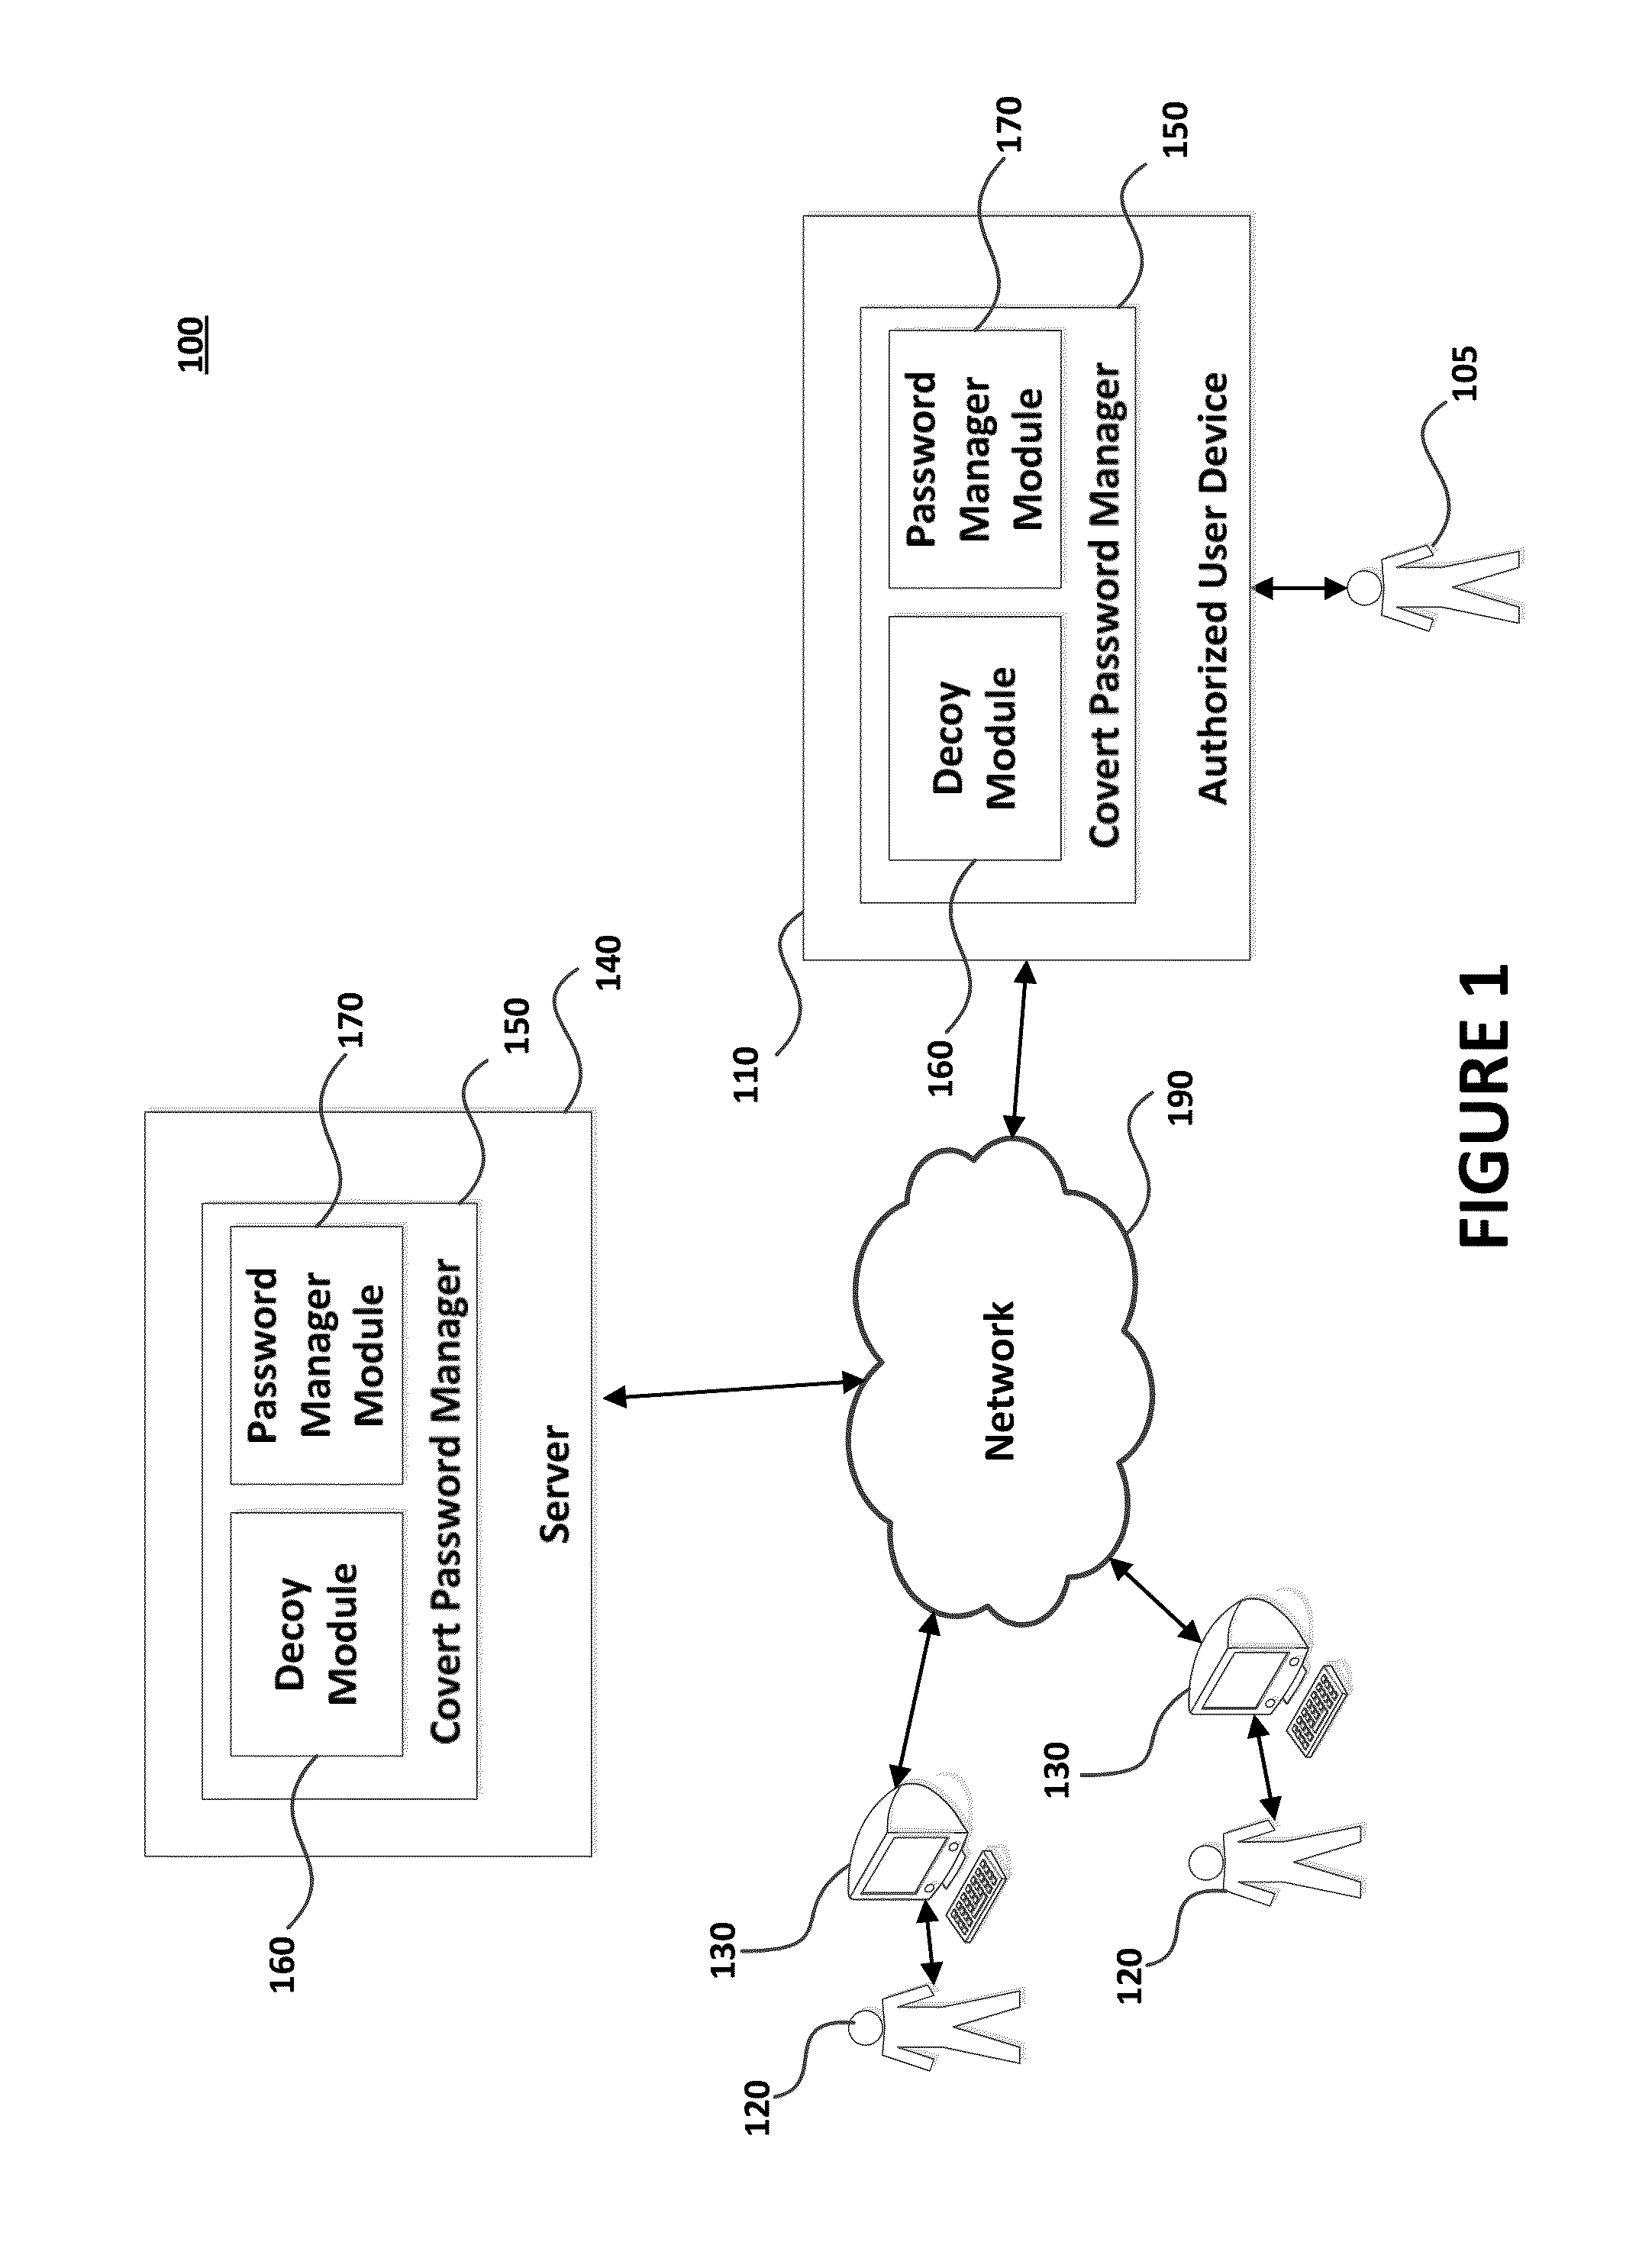 Systems and methods for providing a covert password manager